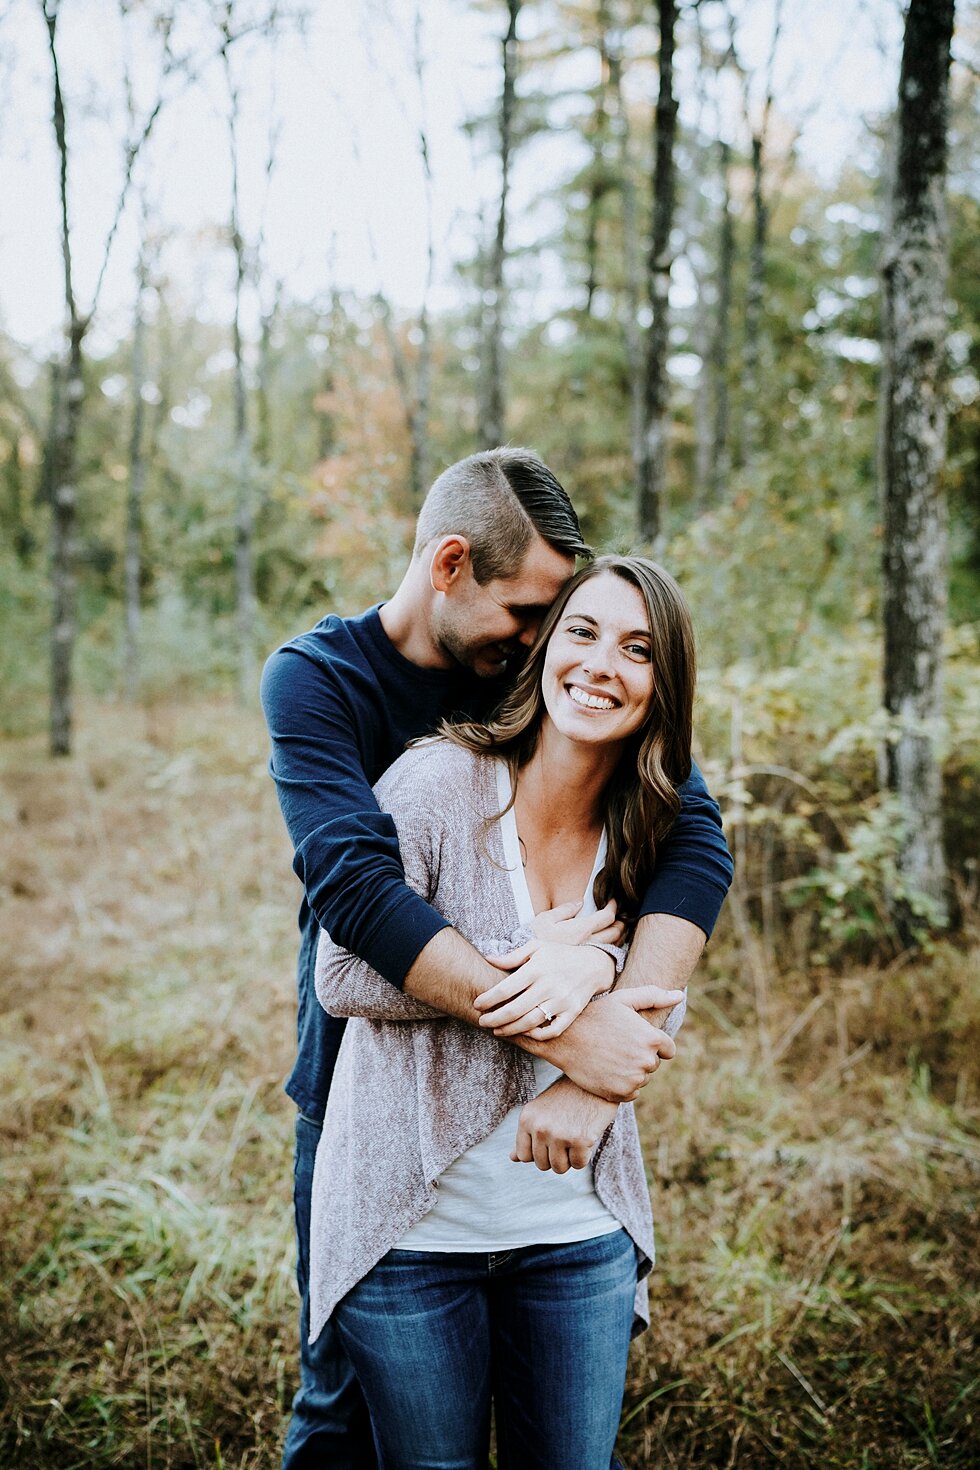  They are so in love and excited to get married #engagementgoals #engagementphotographer #engaged #outdoorengagement #kentuckyphotographer #indianaphotographer #louisvillephotographer #engagementphotos #savethedatephotos #savethedates #engagementphot